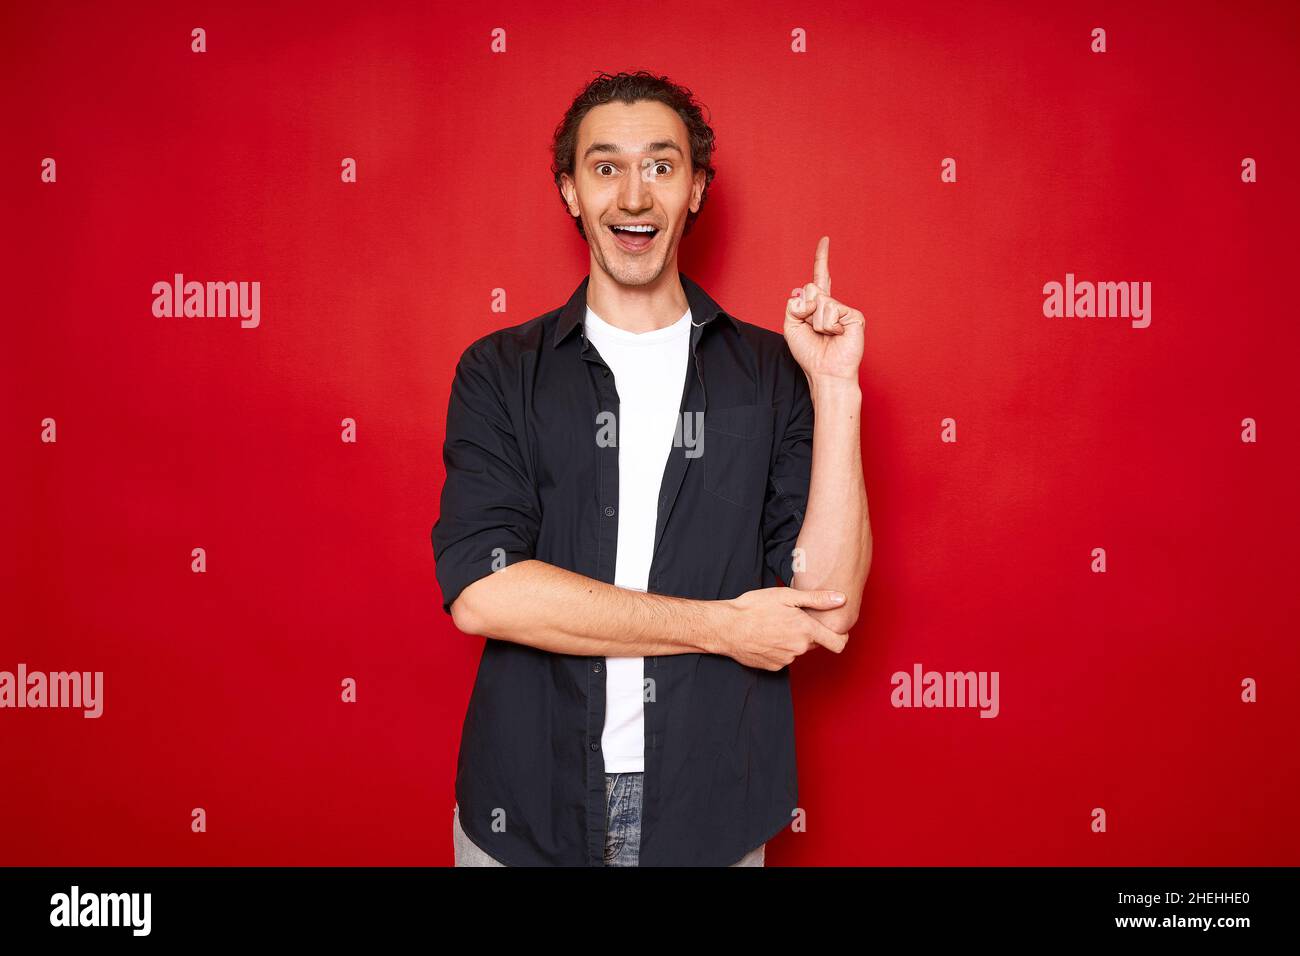 excited man points index finger up, rejoices in new brilliant idea. isolated on red background Stock Photo